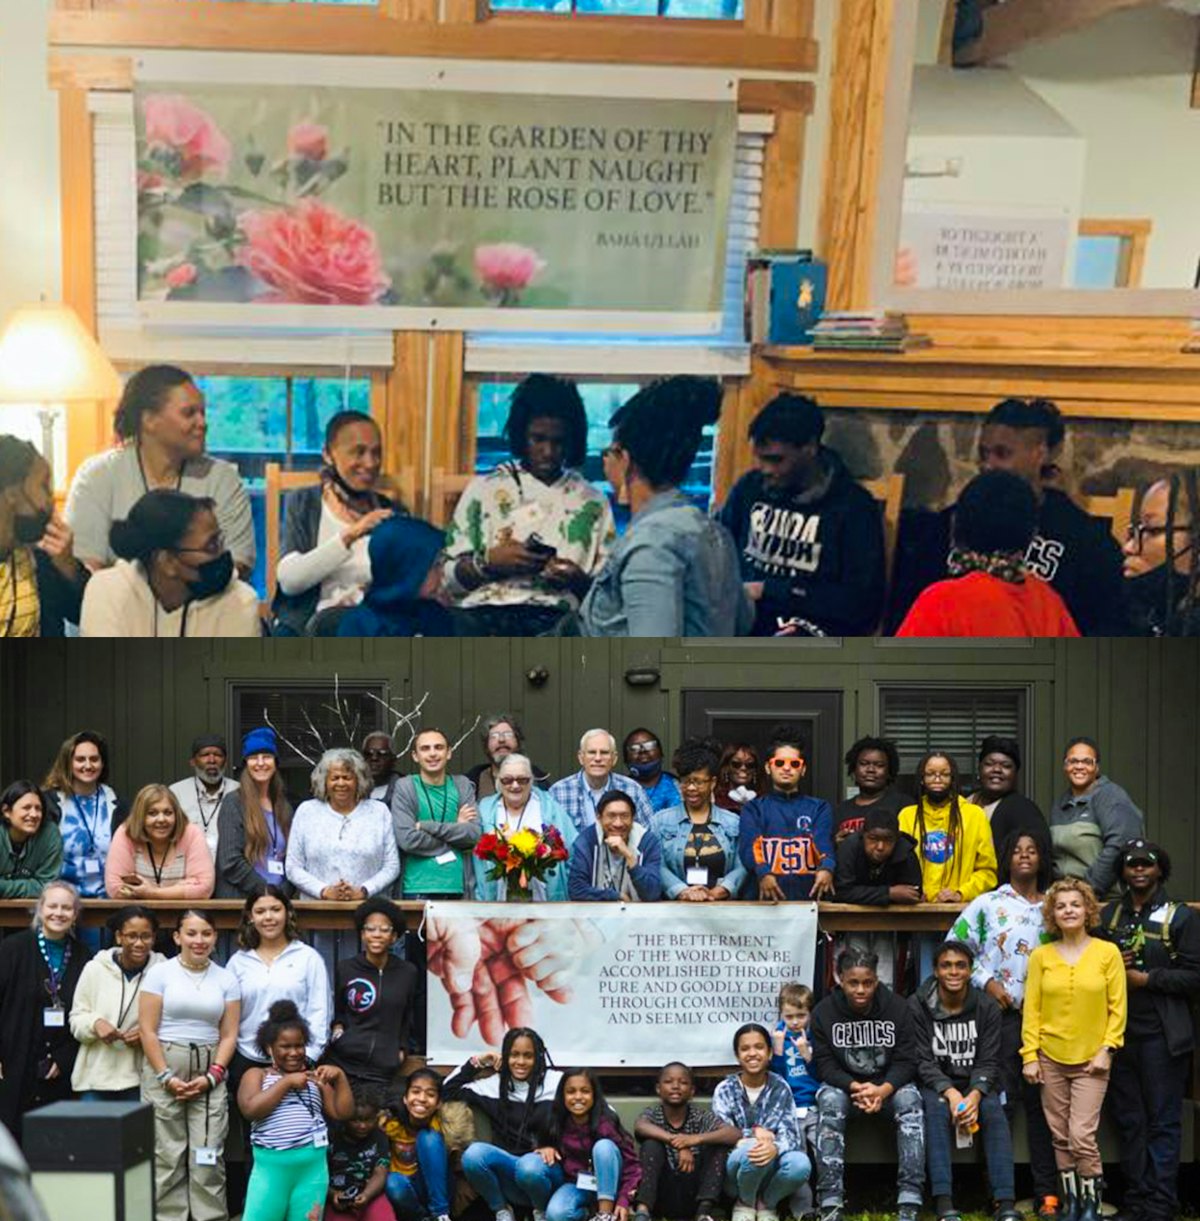 Pictured here are participants of a gathering in the Twin Lakes conference in Prince Edward County, Virginia in the United States. Top-center: Patti Cooper-Jones, member of the Board of Supervisors for that county